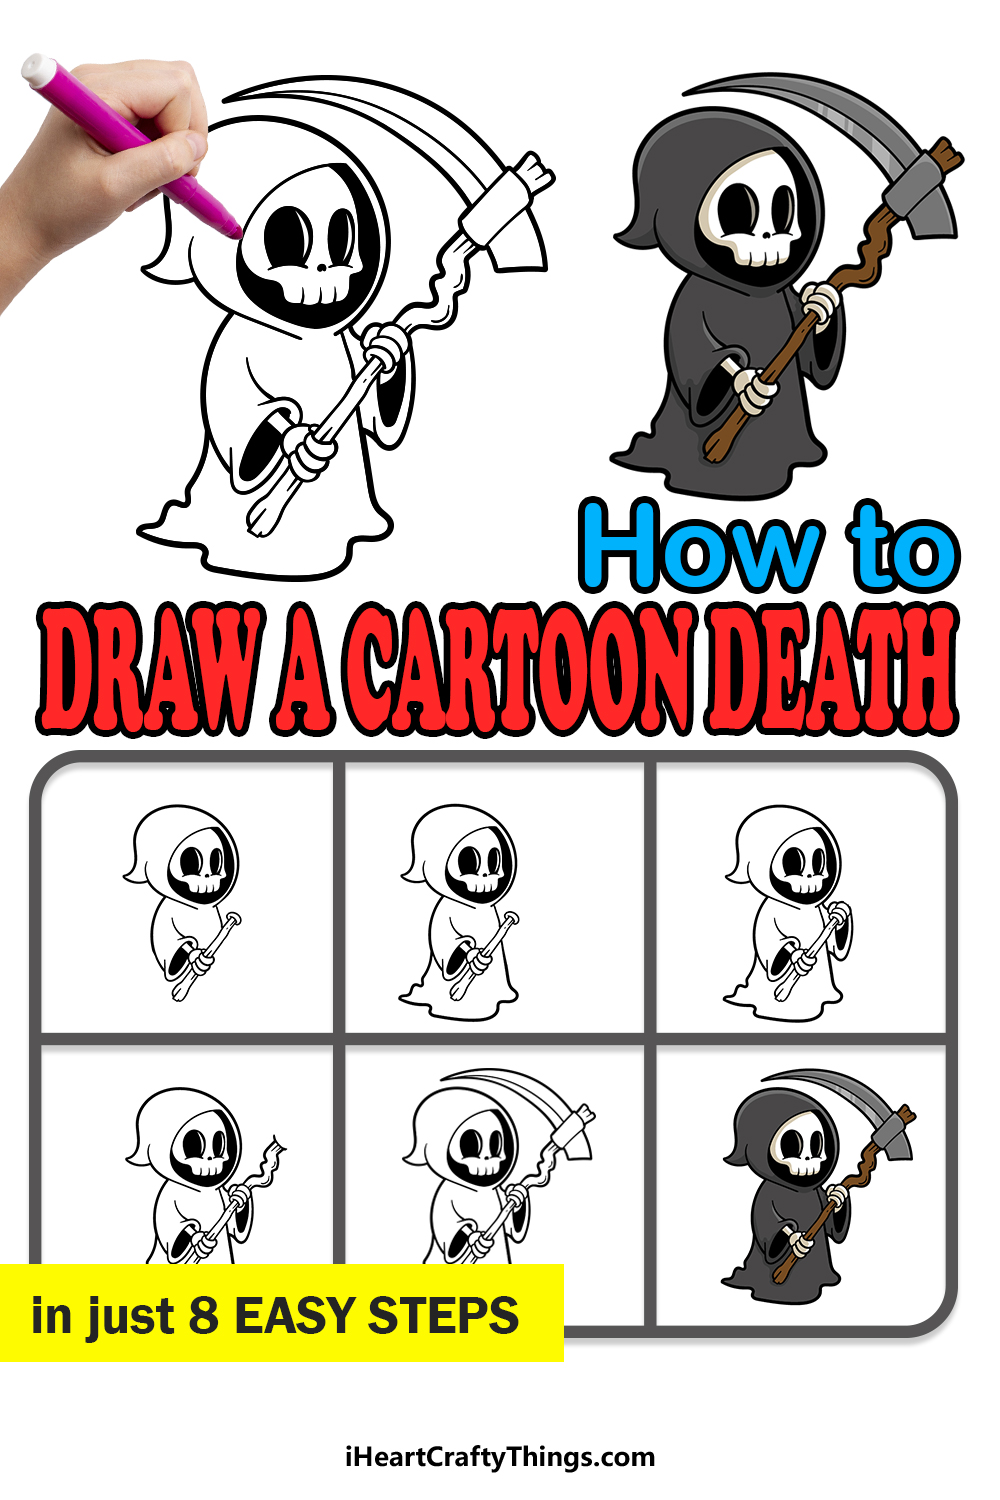 how to draw a cartoon death in 8 easy steps